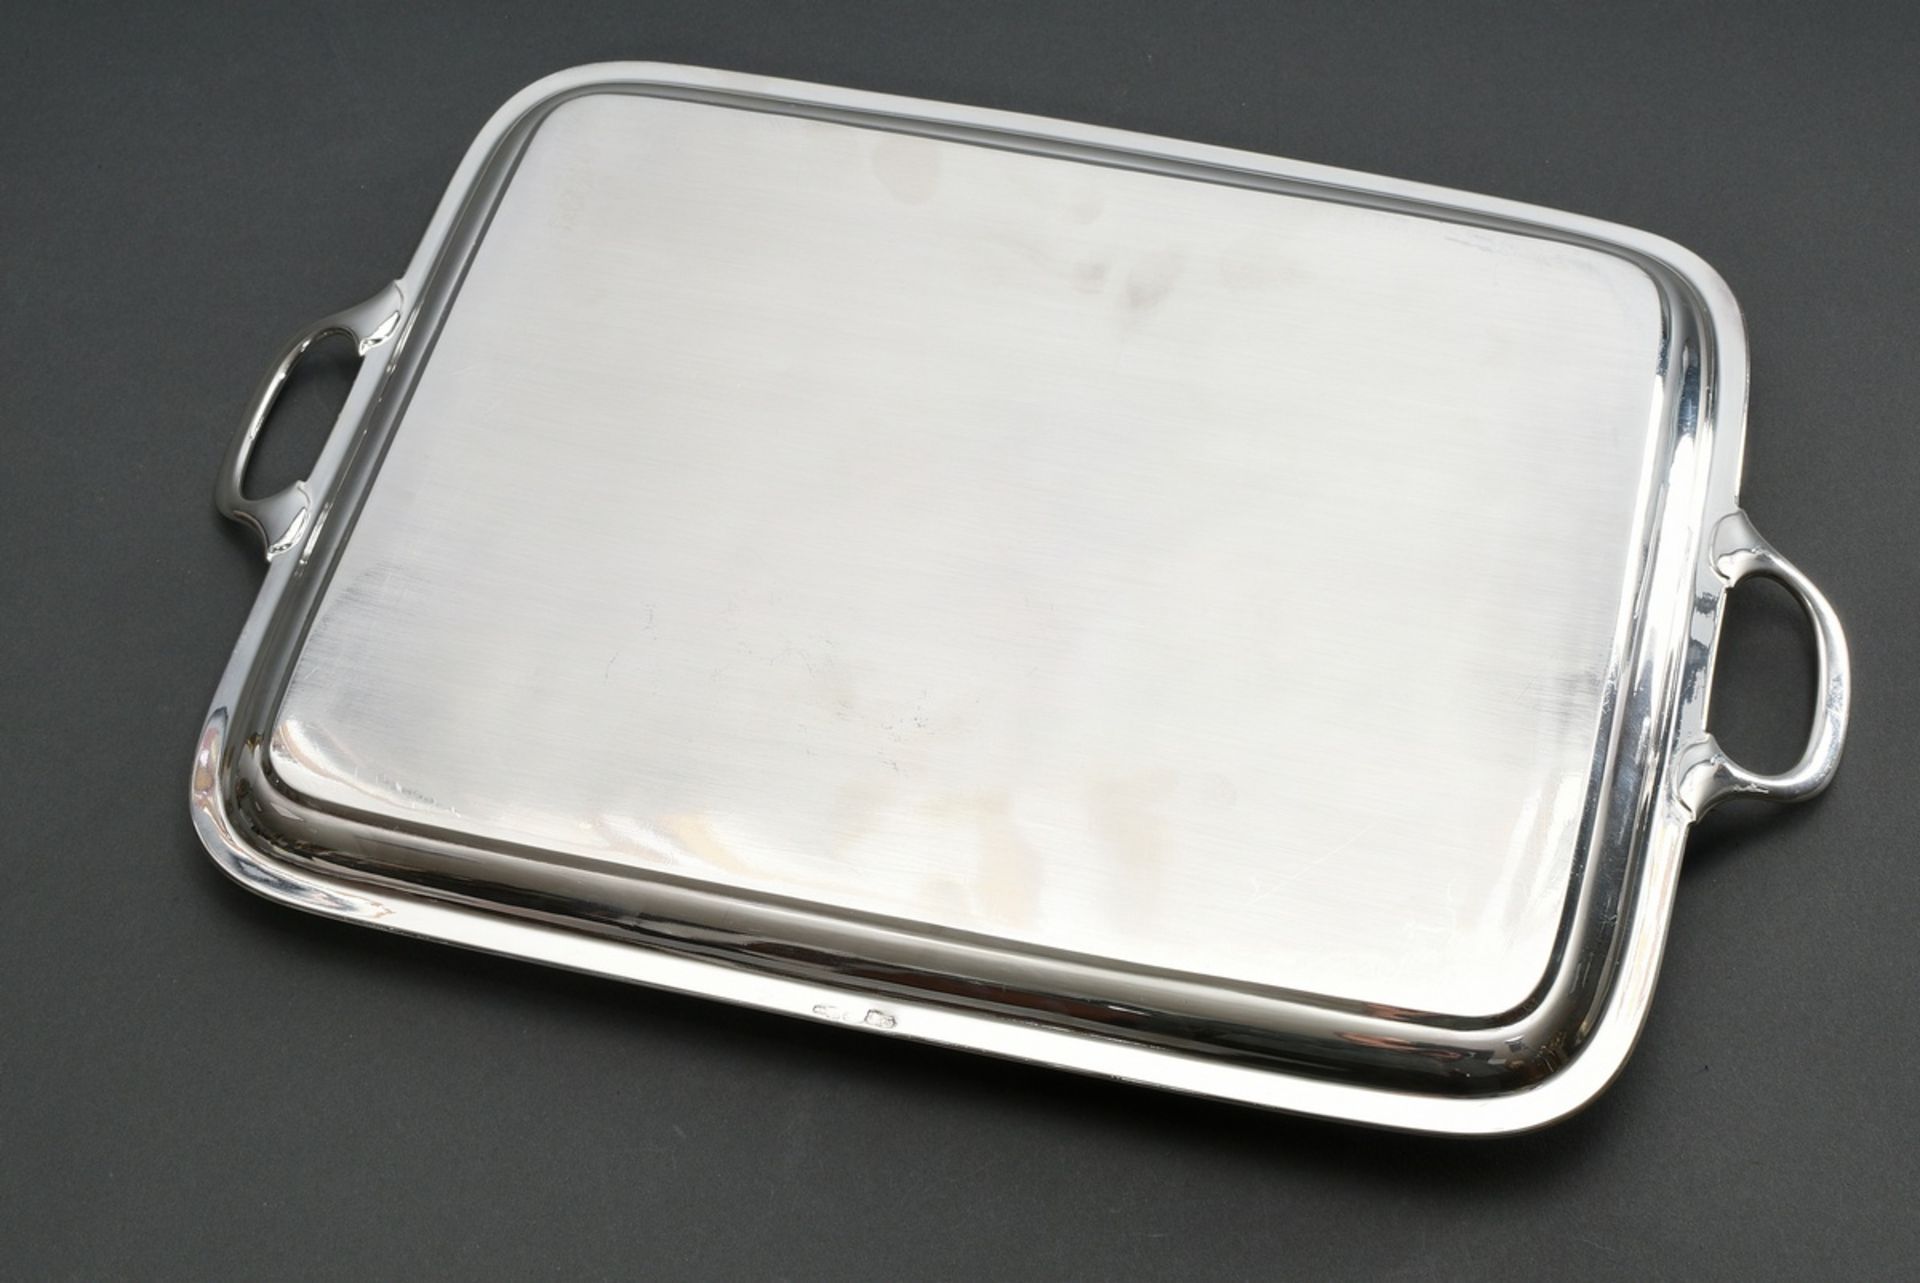 Rectangular tray in a simple design with side handles and monogram in Fraktur script ‘JR’ and date  - Image 6 of 6